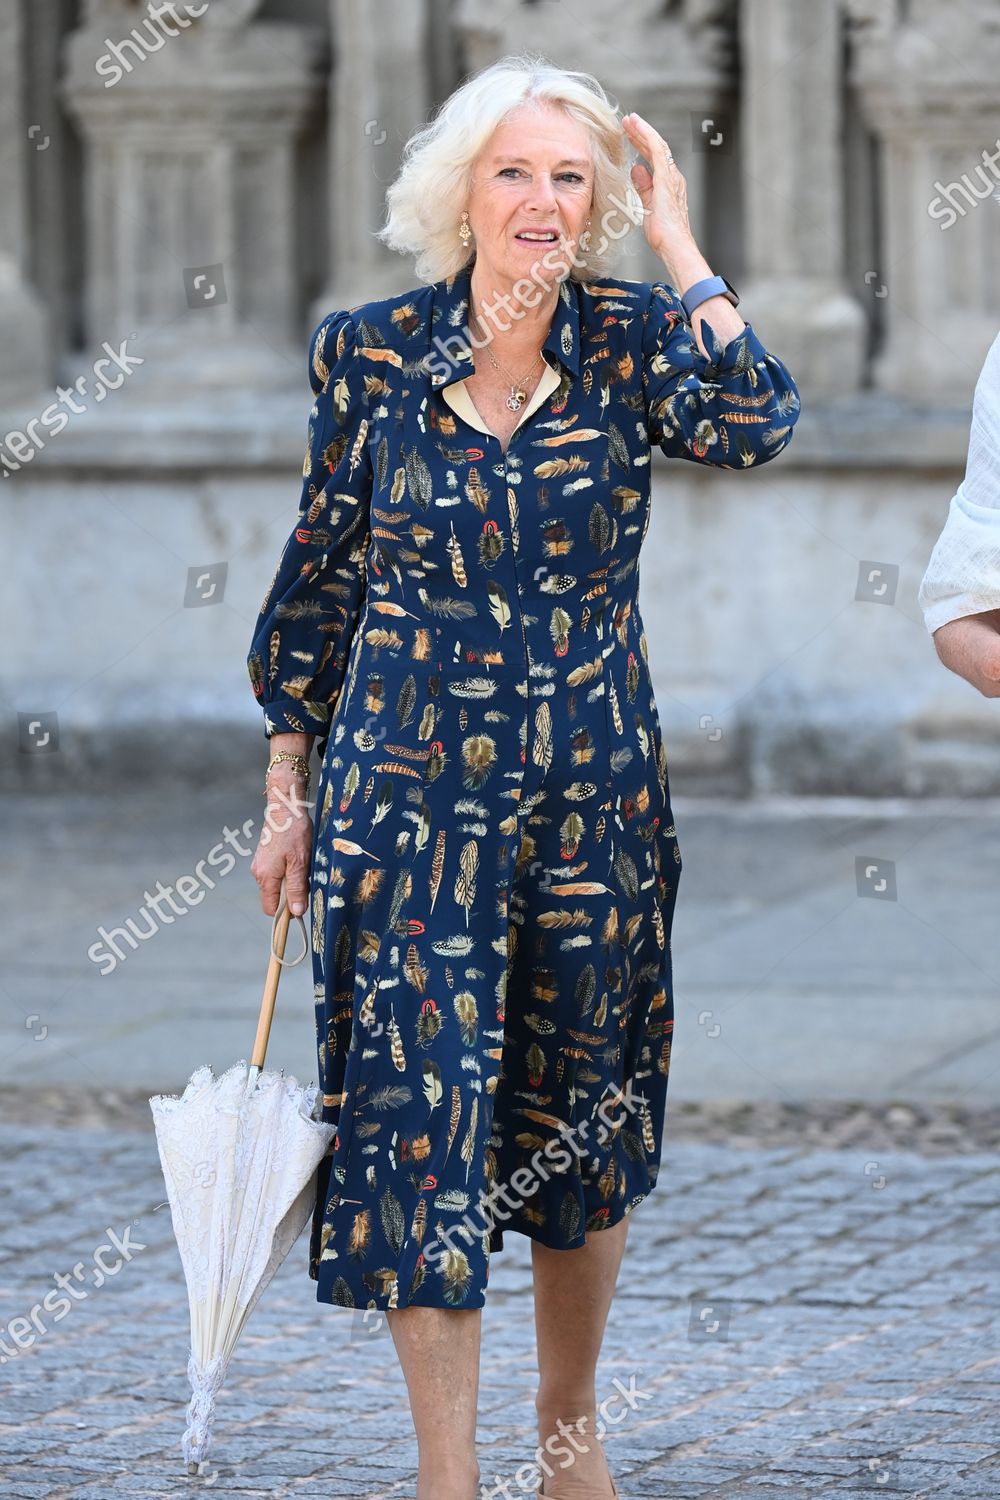 prince-charles-and-camilla-duchess-of-cornwall-visit-to-devon-and-cornwall-day-1-uk-shutterstock-editorial-12221468e.jpg